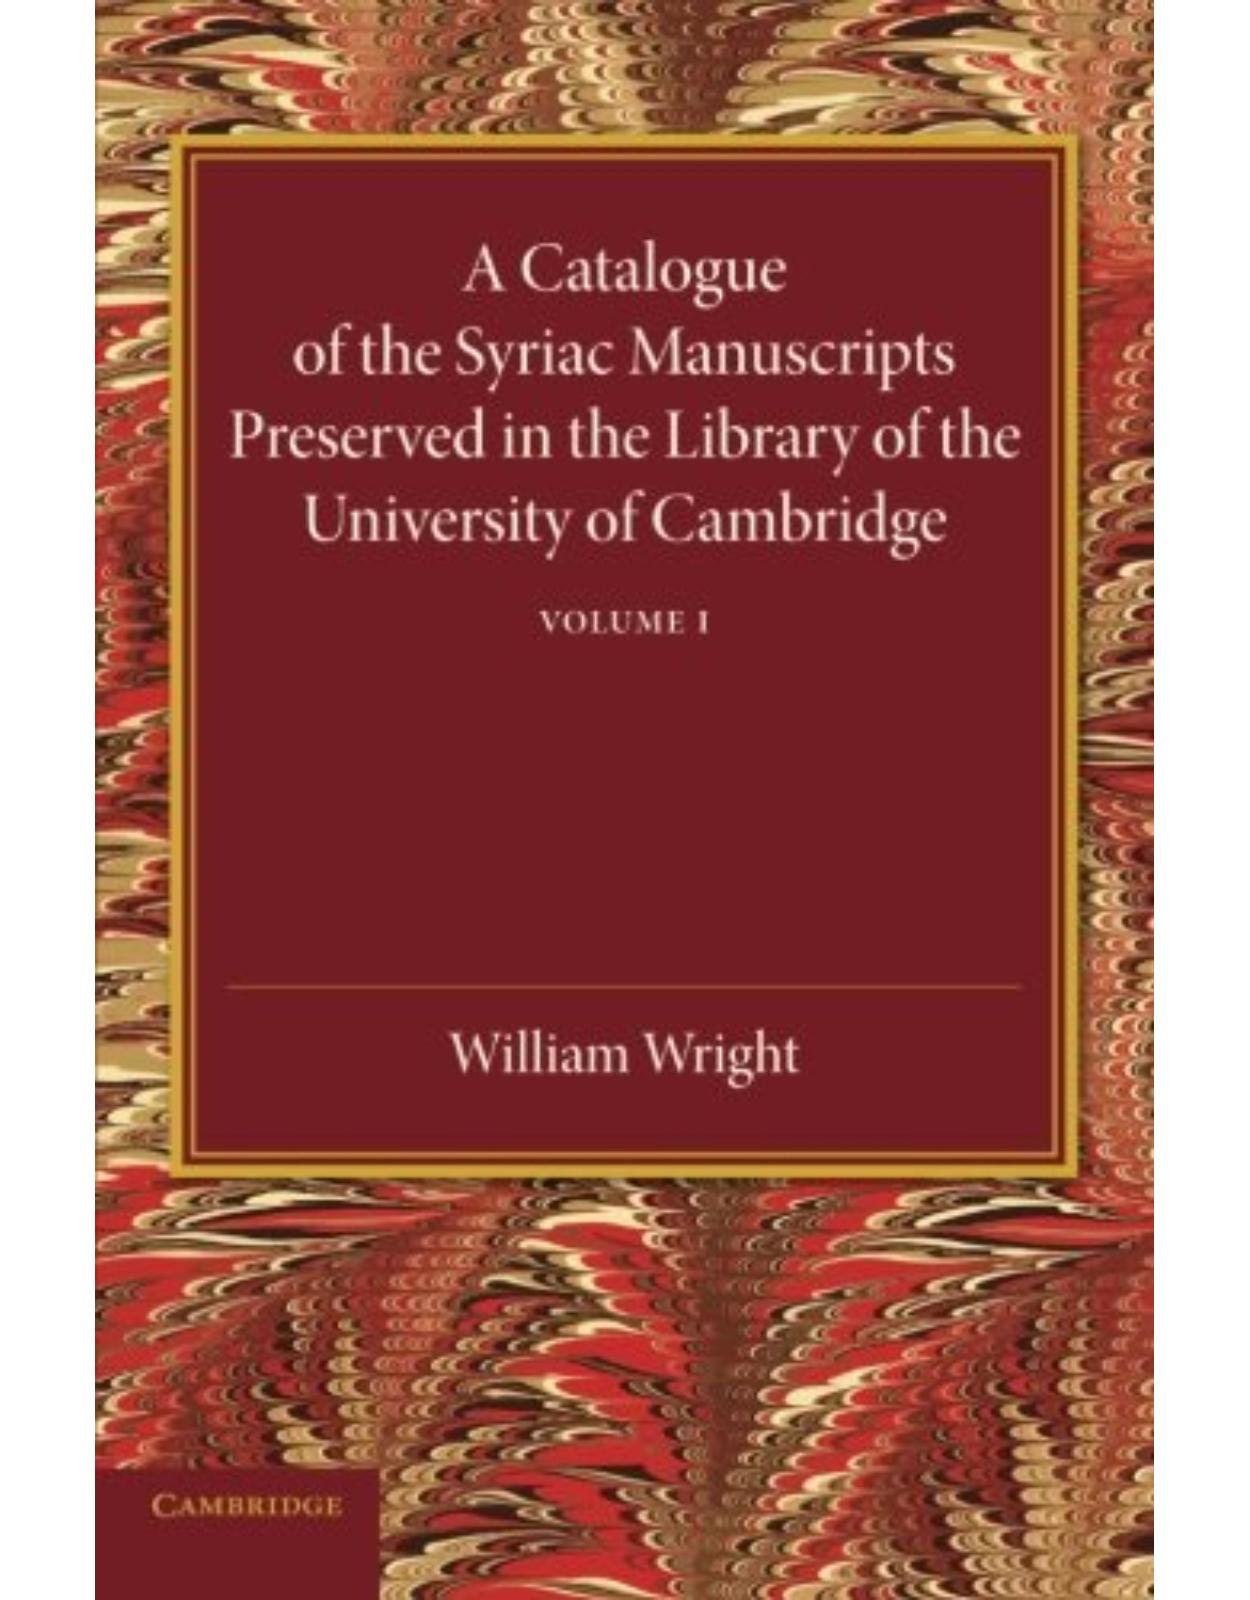 A Catalogue of the Syriac Manuscripts Preserved in the Library of the University of Cambridge: Volume 1